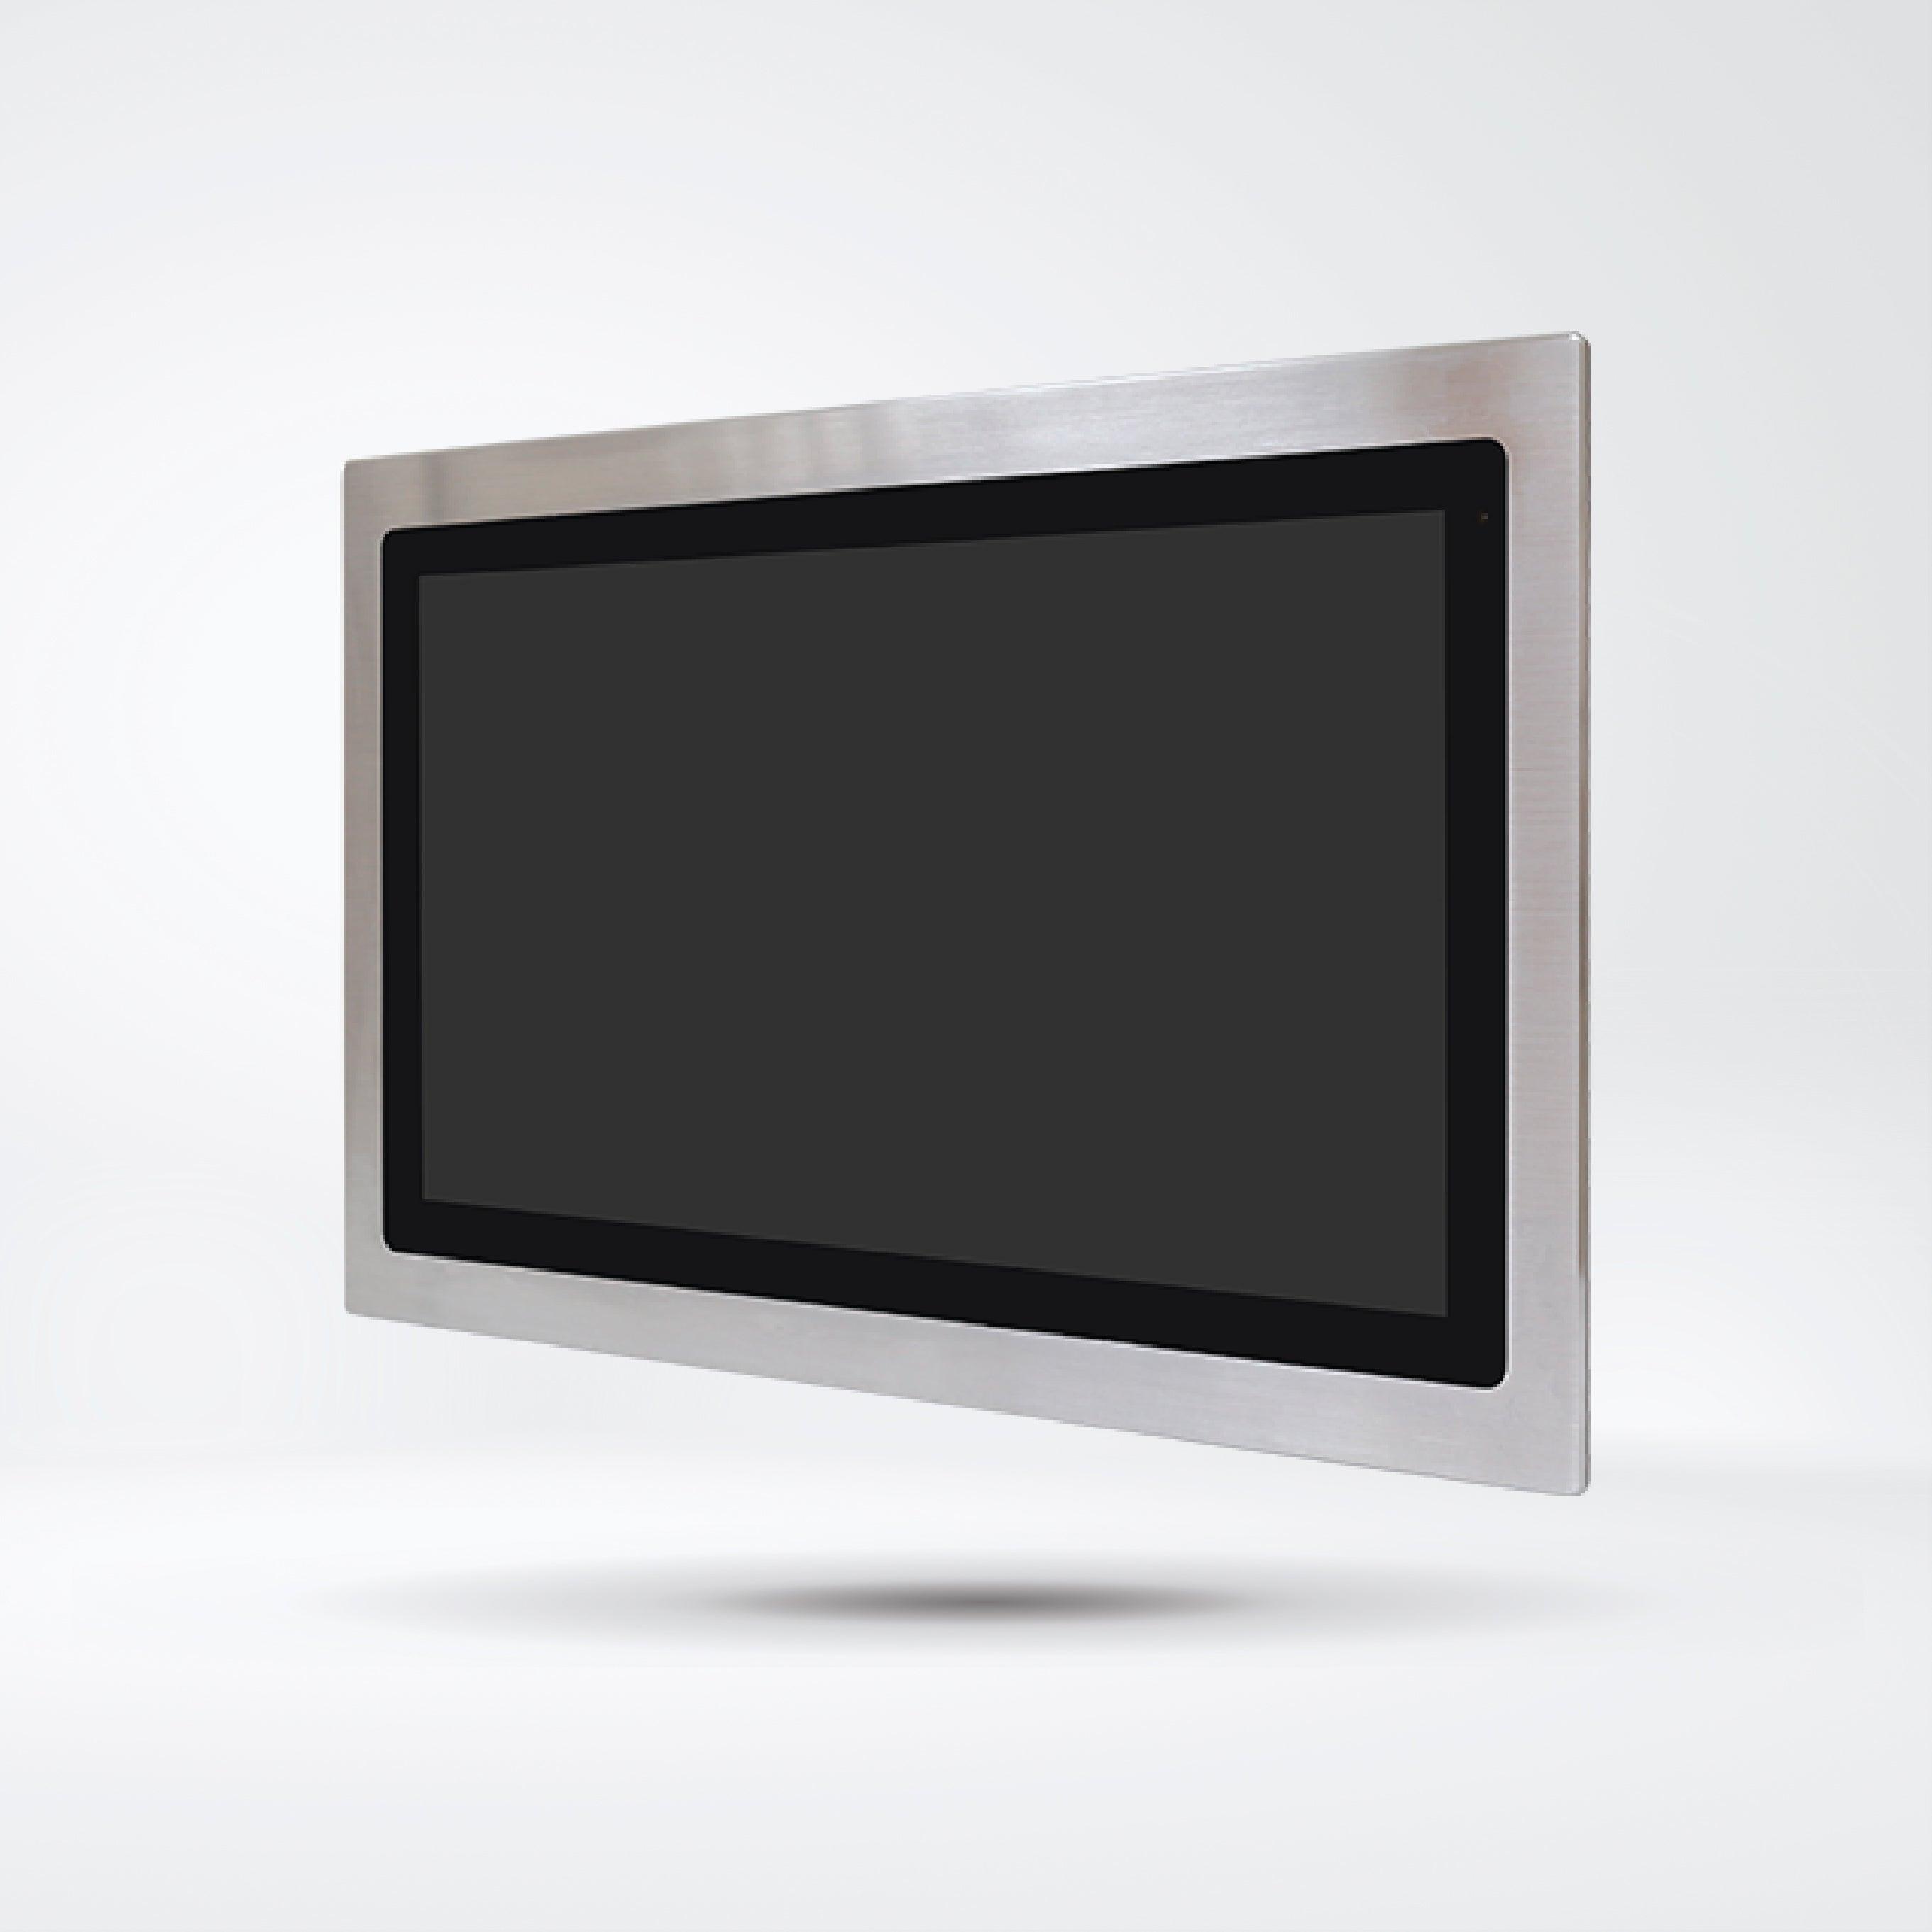 FABS-121R 21.5” Flat Front Panel IP66 Stainless Chassis Display - Riverplus